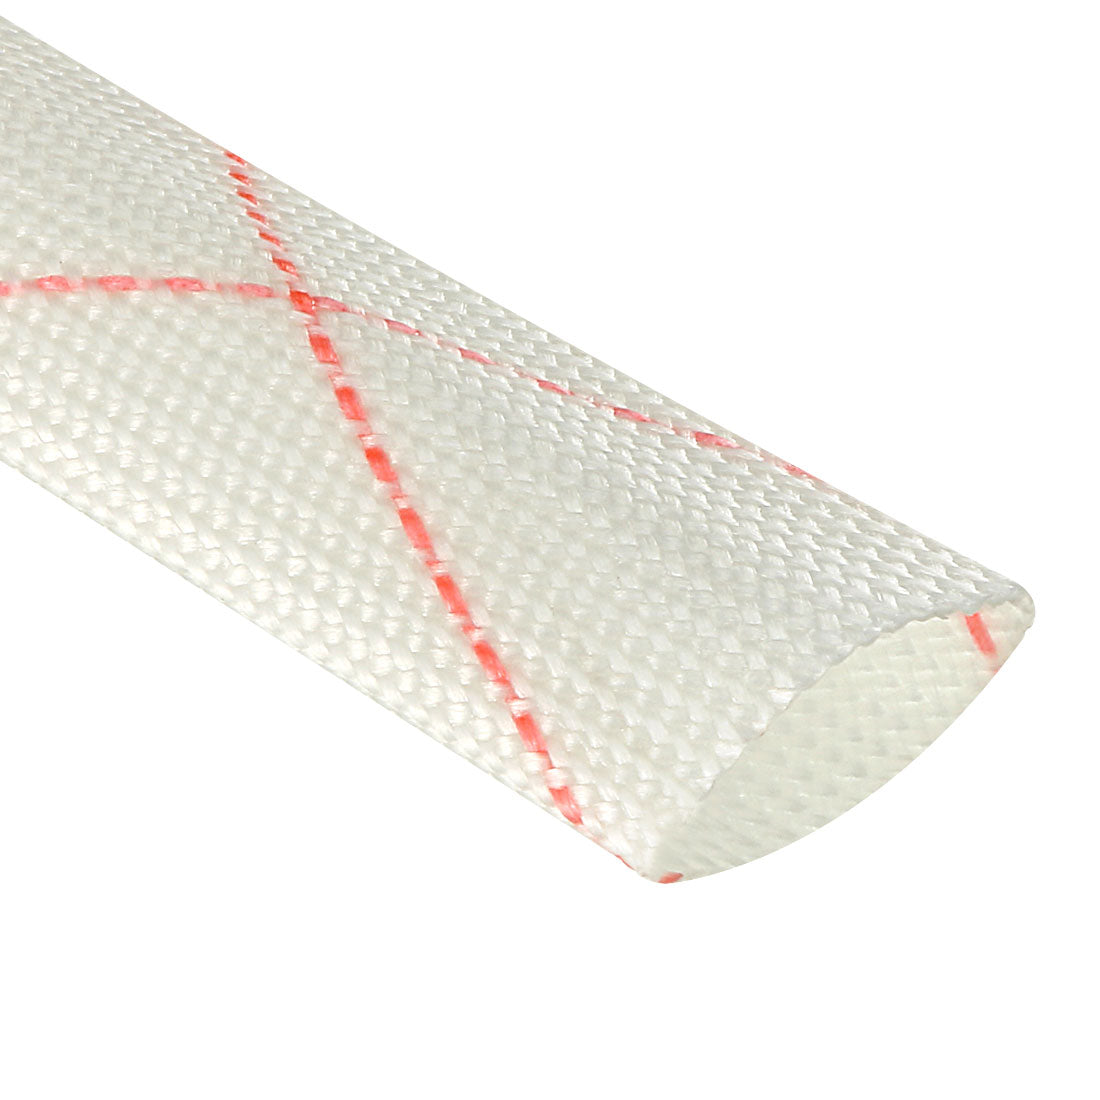 uxcell Uxcell Fiberglass Sleeve 18mm I.D. PVC Insulation Tubing 1500V Tube Adjustable Sleeving Pipe 125 Degree Centigrade Cable Wrap Wire 880mm 2.89ft White and Red